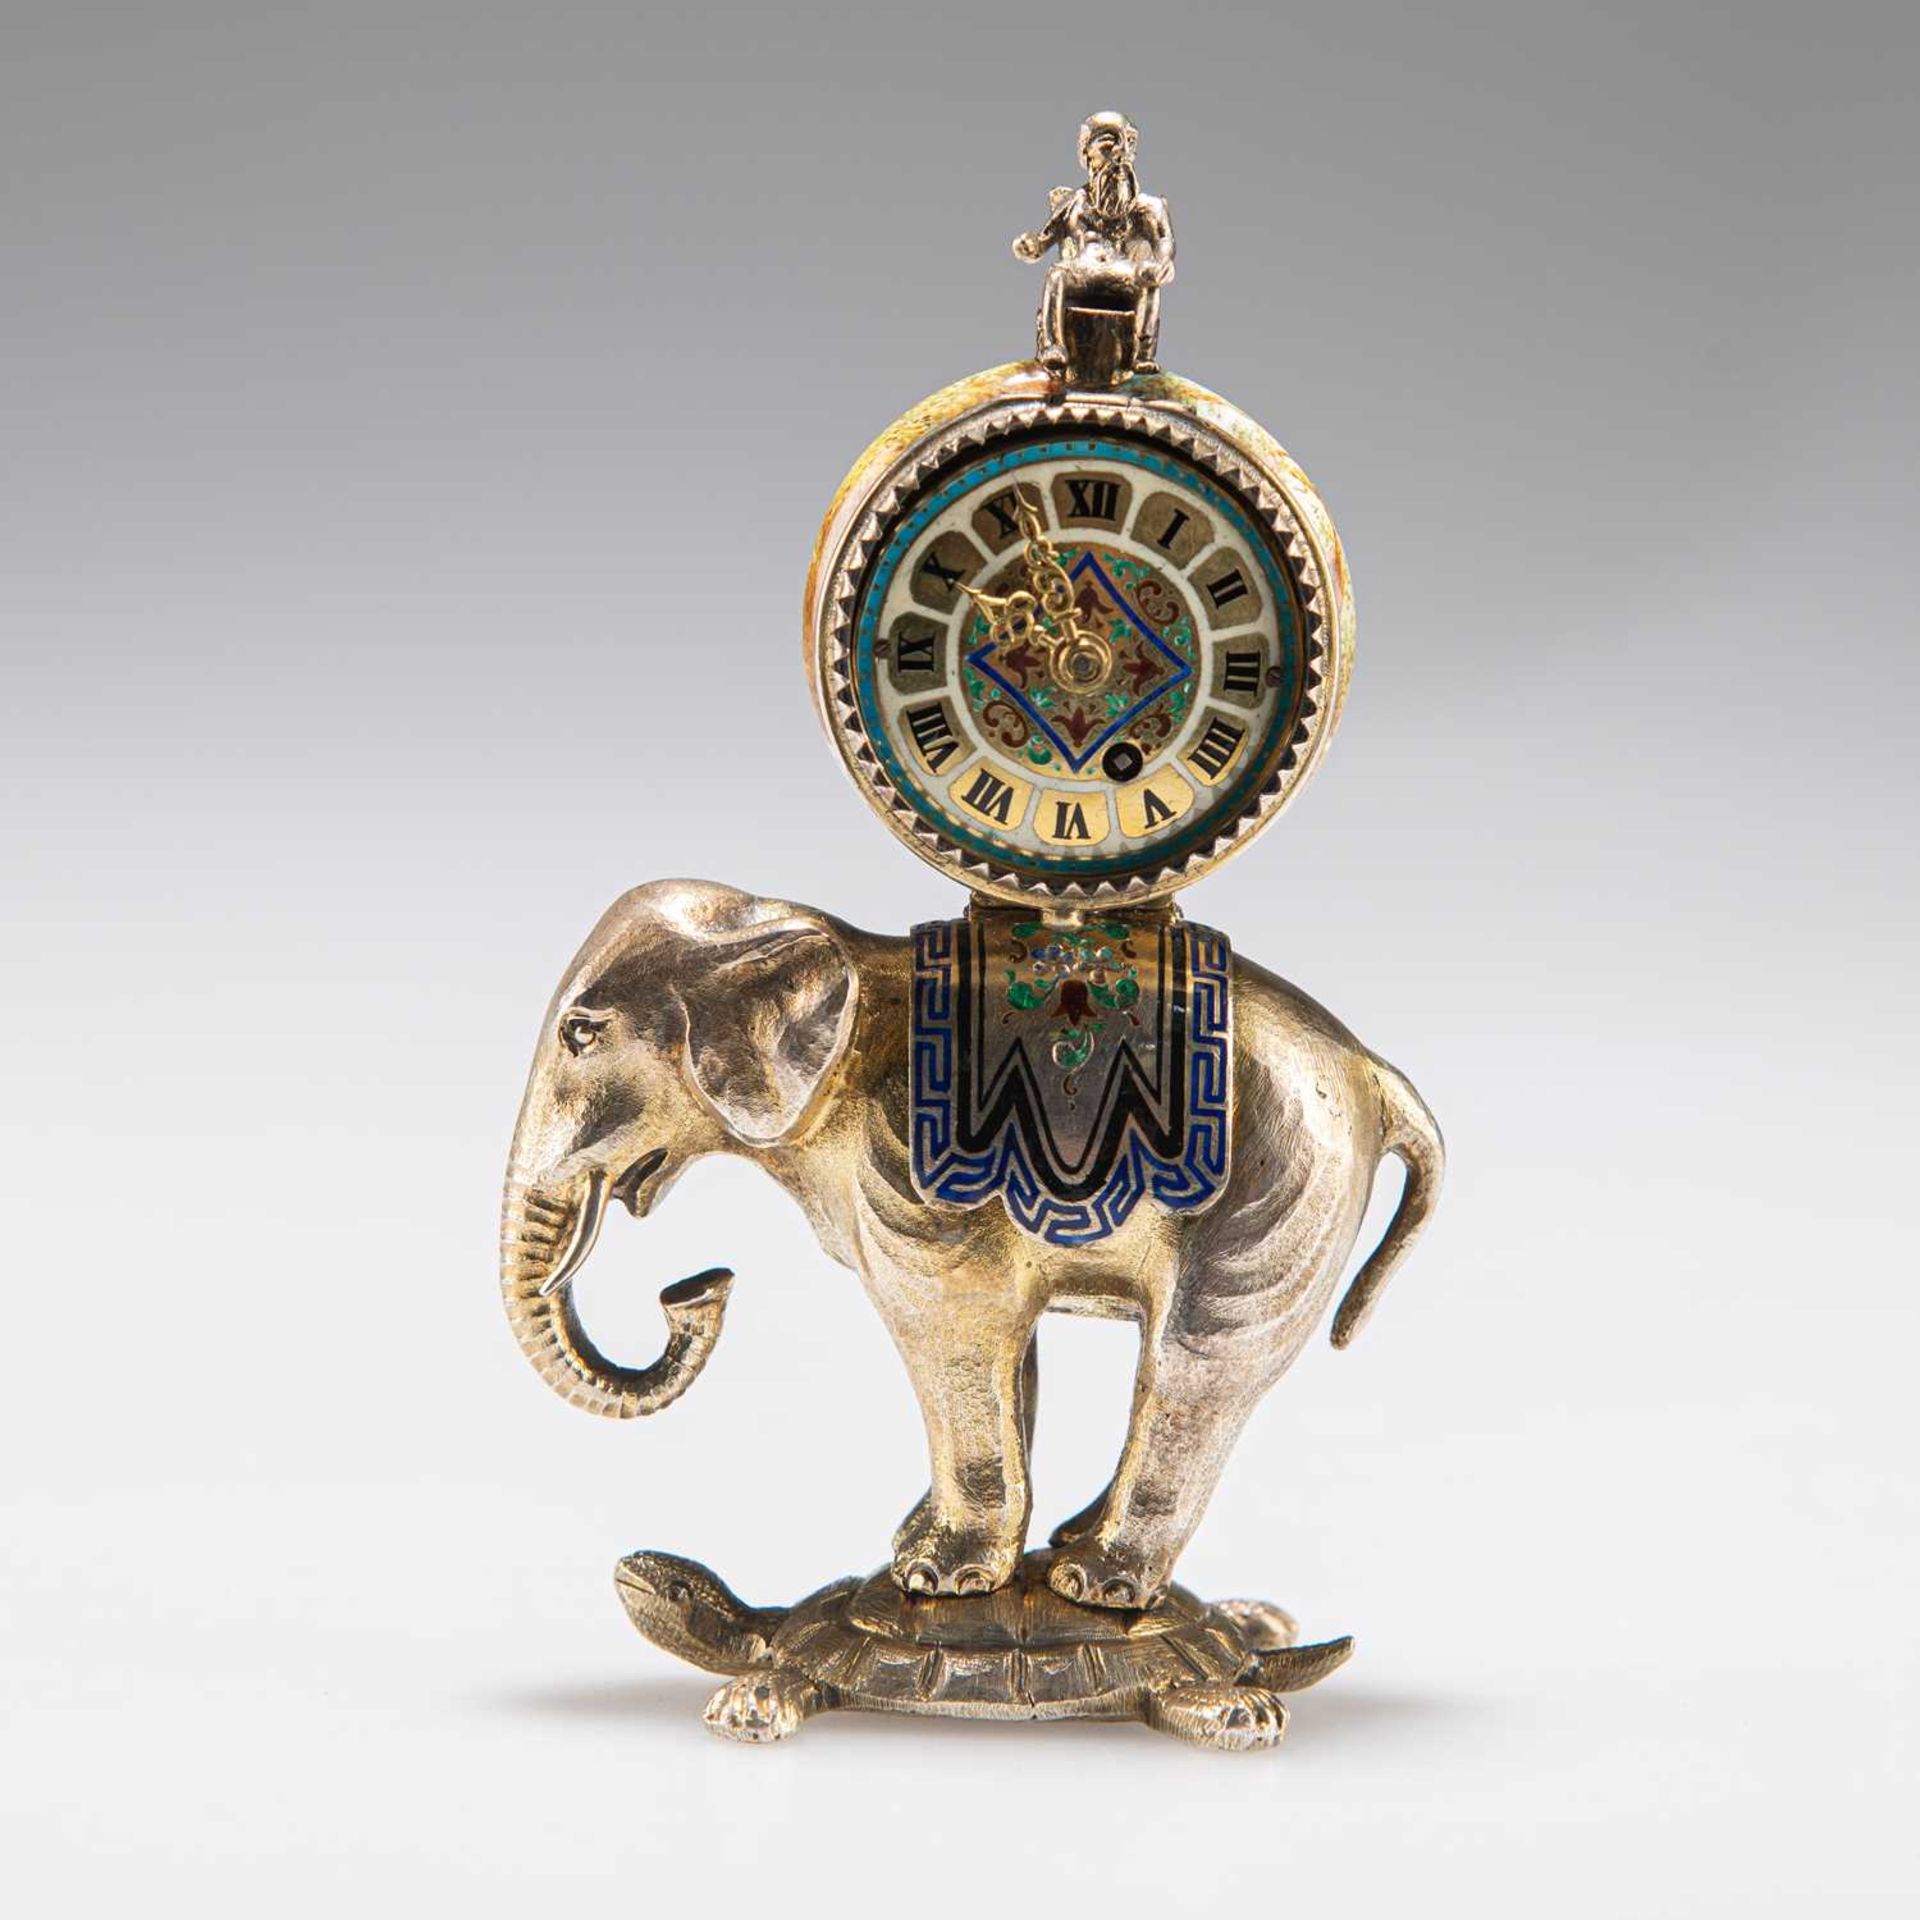 A RARE MINIATURE VIENNESE SILVER-GILT AND ENAMEL ELEPHANT CLOCK, 19TH CENTURY - Image 2 of 2